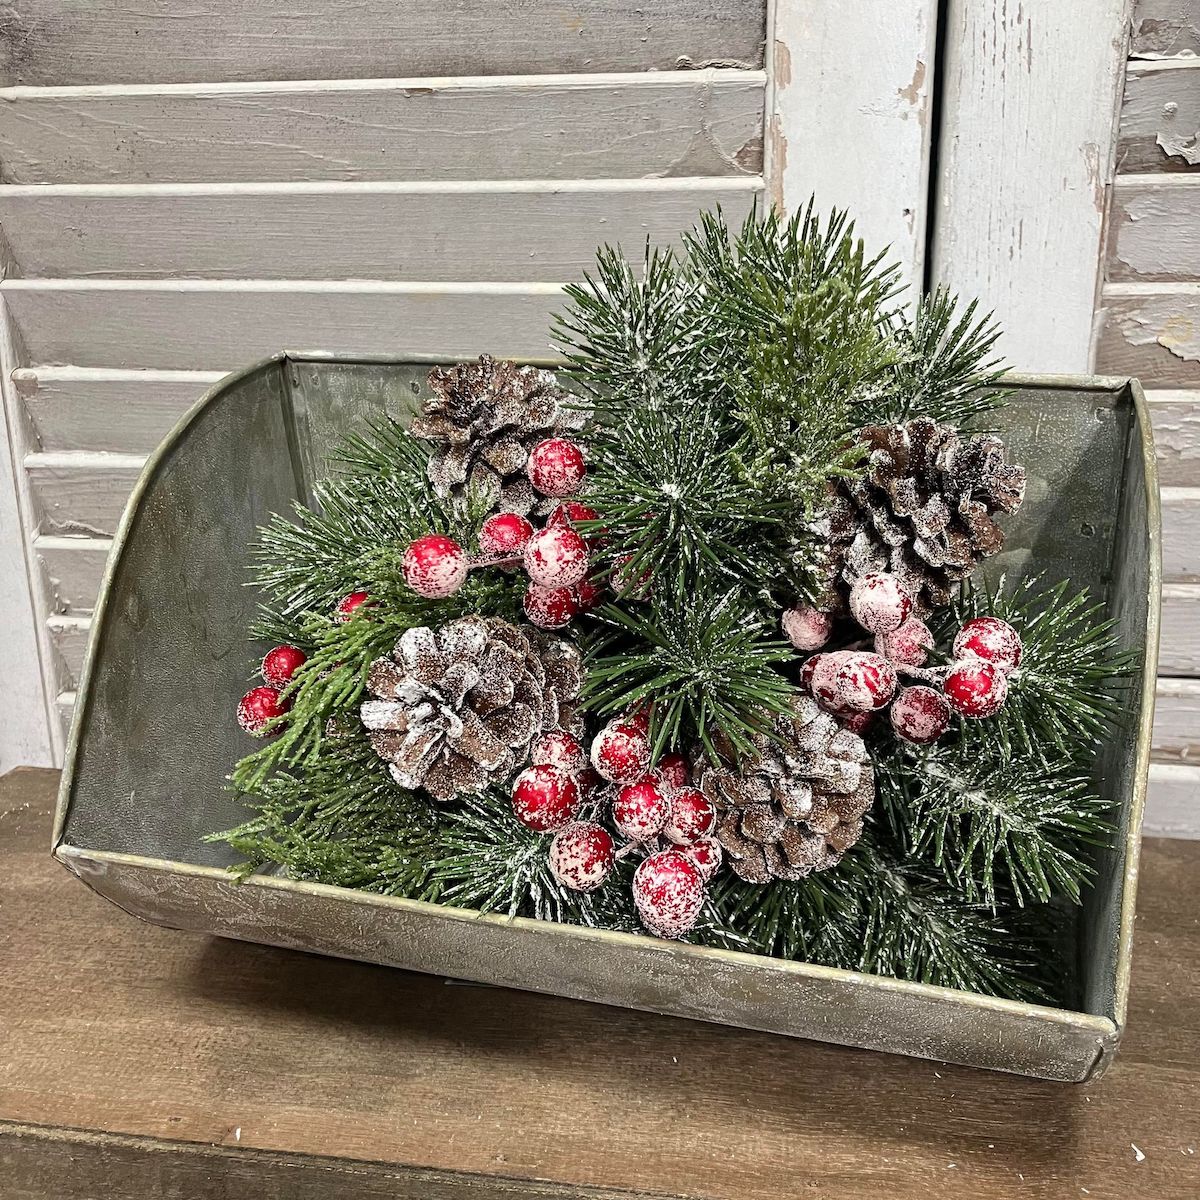 Galvanized Decorative Grain Scoop with Frosted Fir & Berries Winter Greens